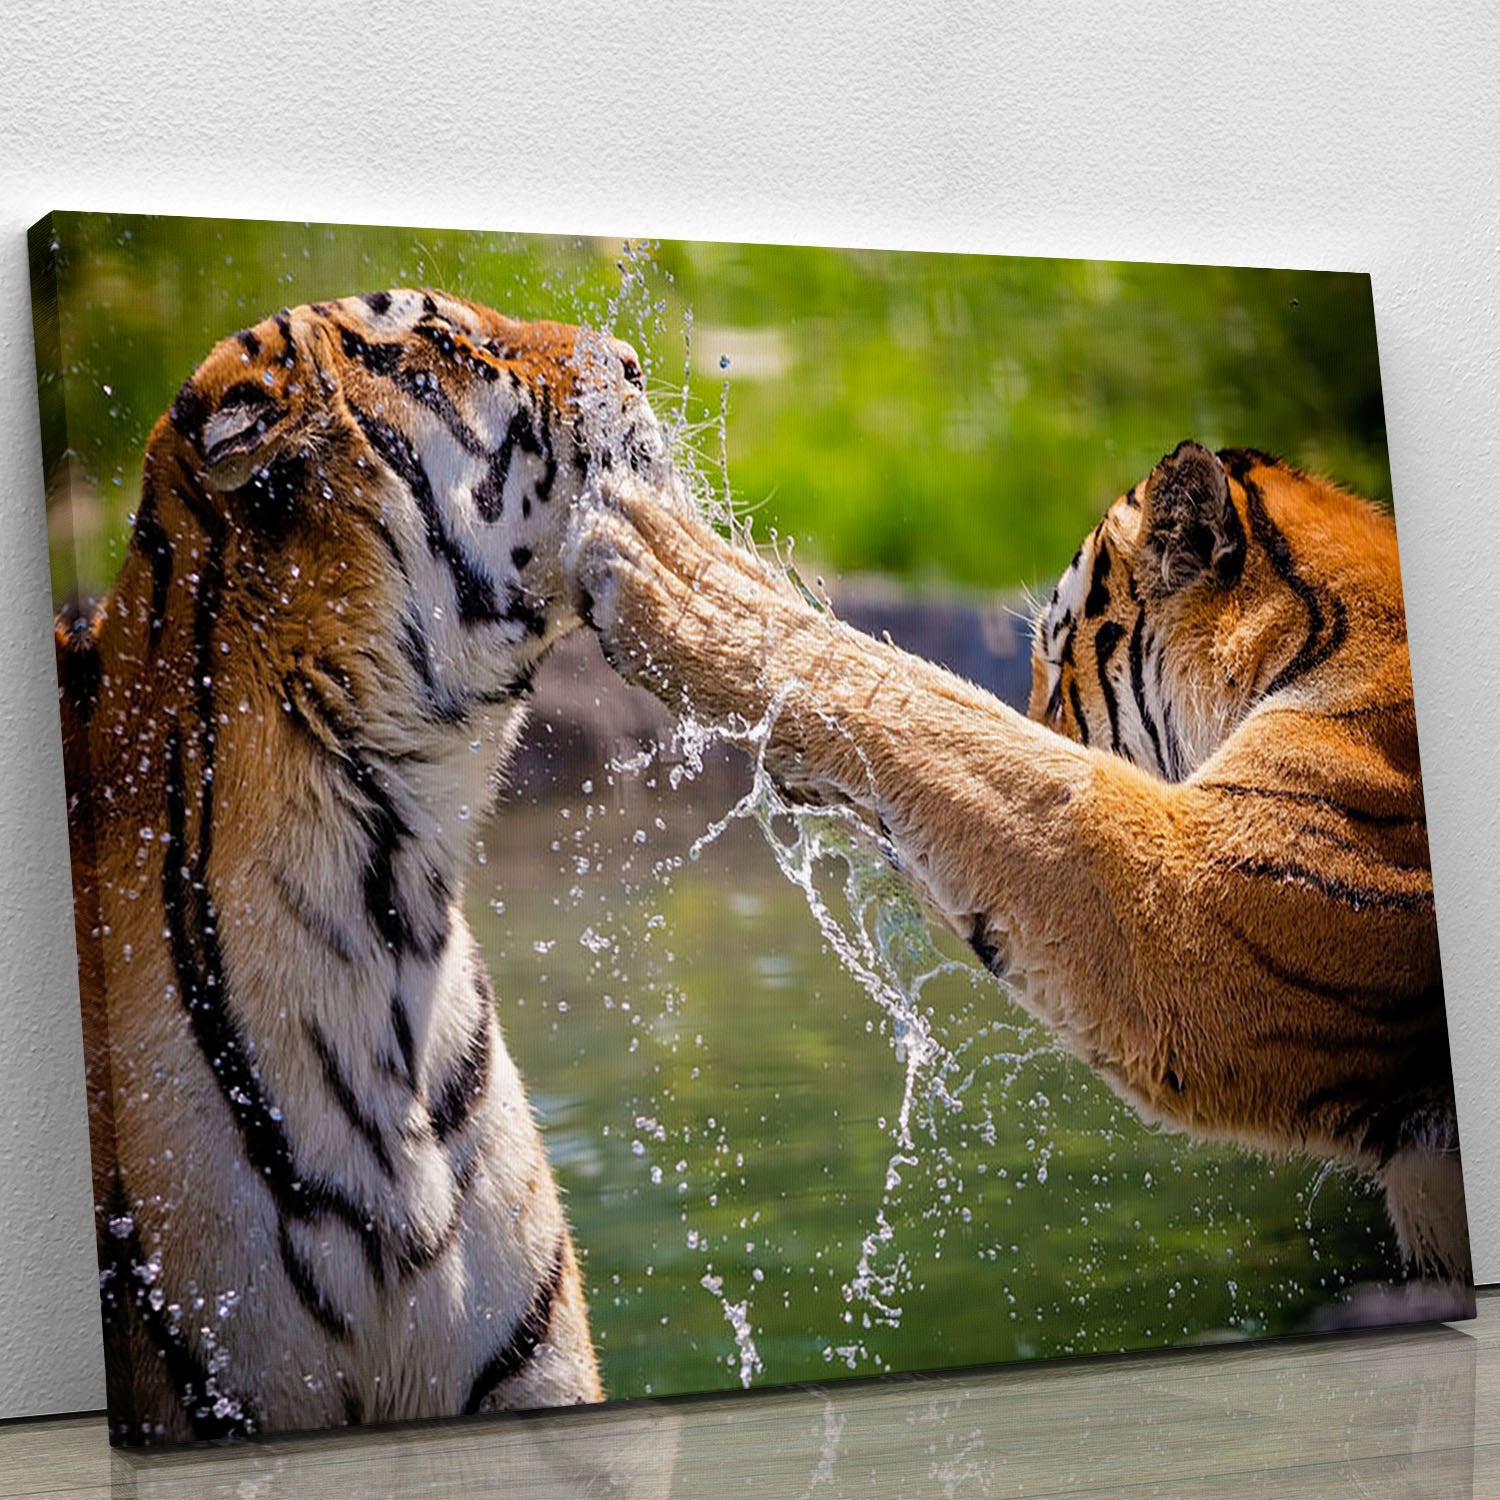 Two adult tigers at play in the water Canvas Print or Poster